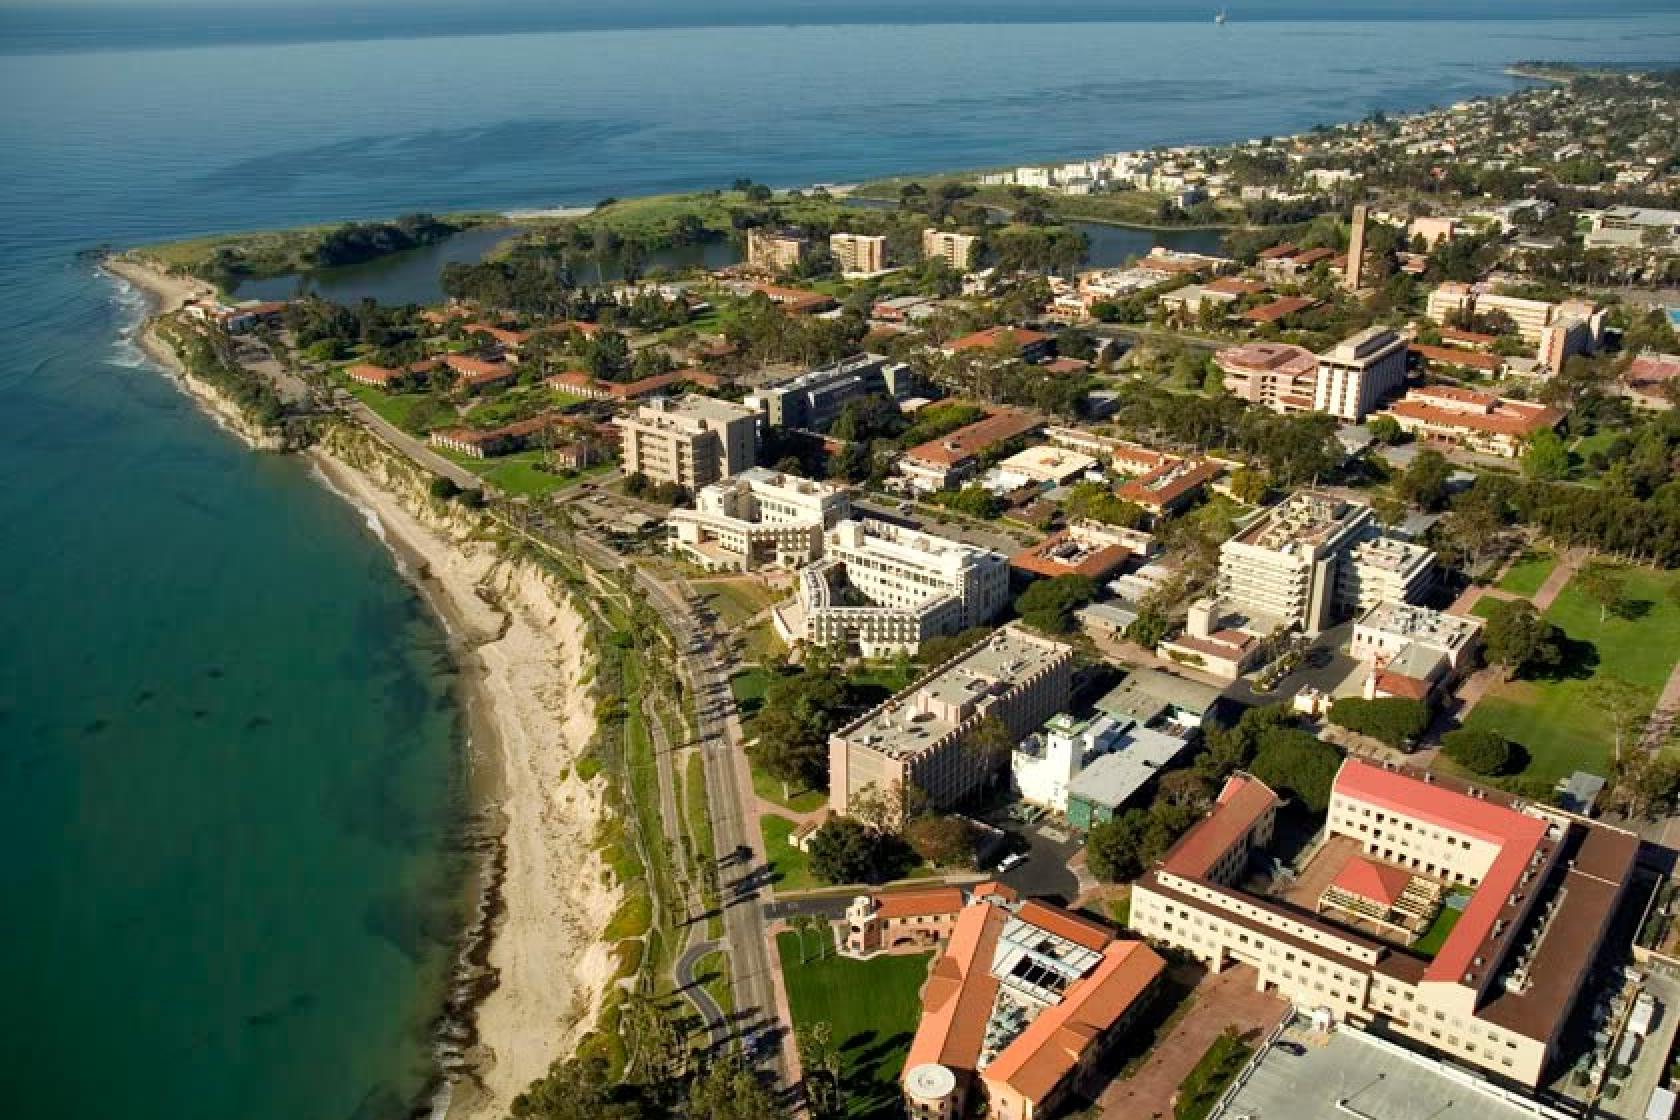 UCSB Campus Pt. aerial view, MSI building